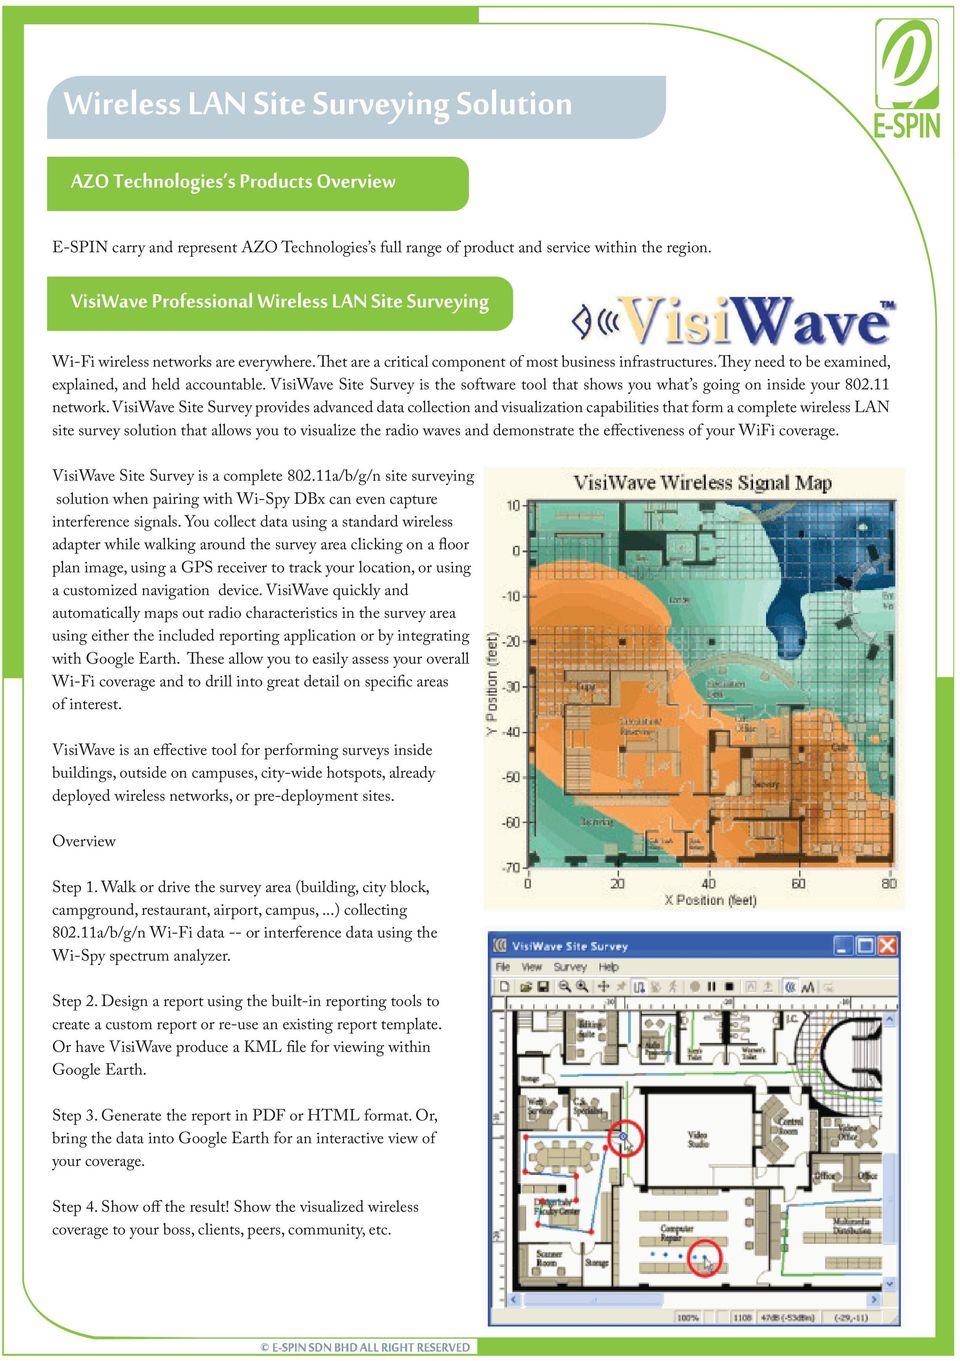 VisiWave Site Survey is the software tool that shows you what s going on inside your 802.11 network.